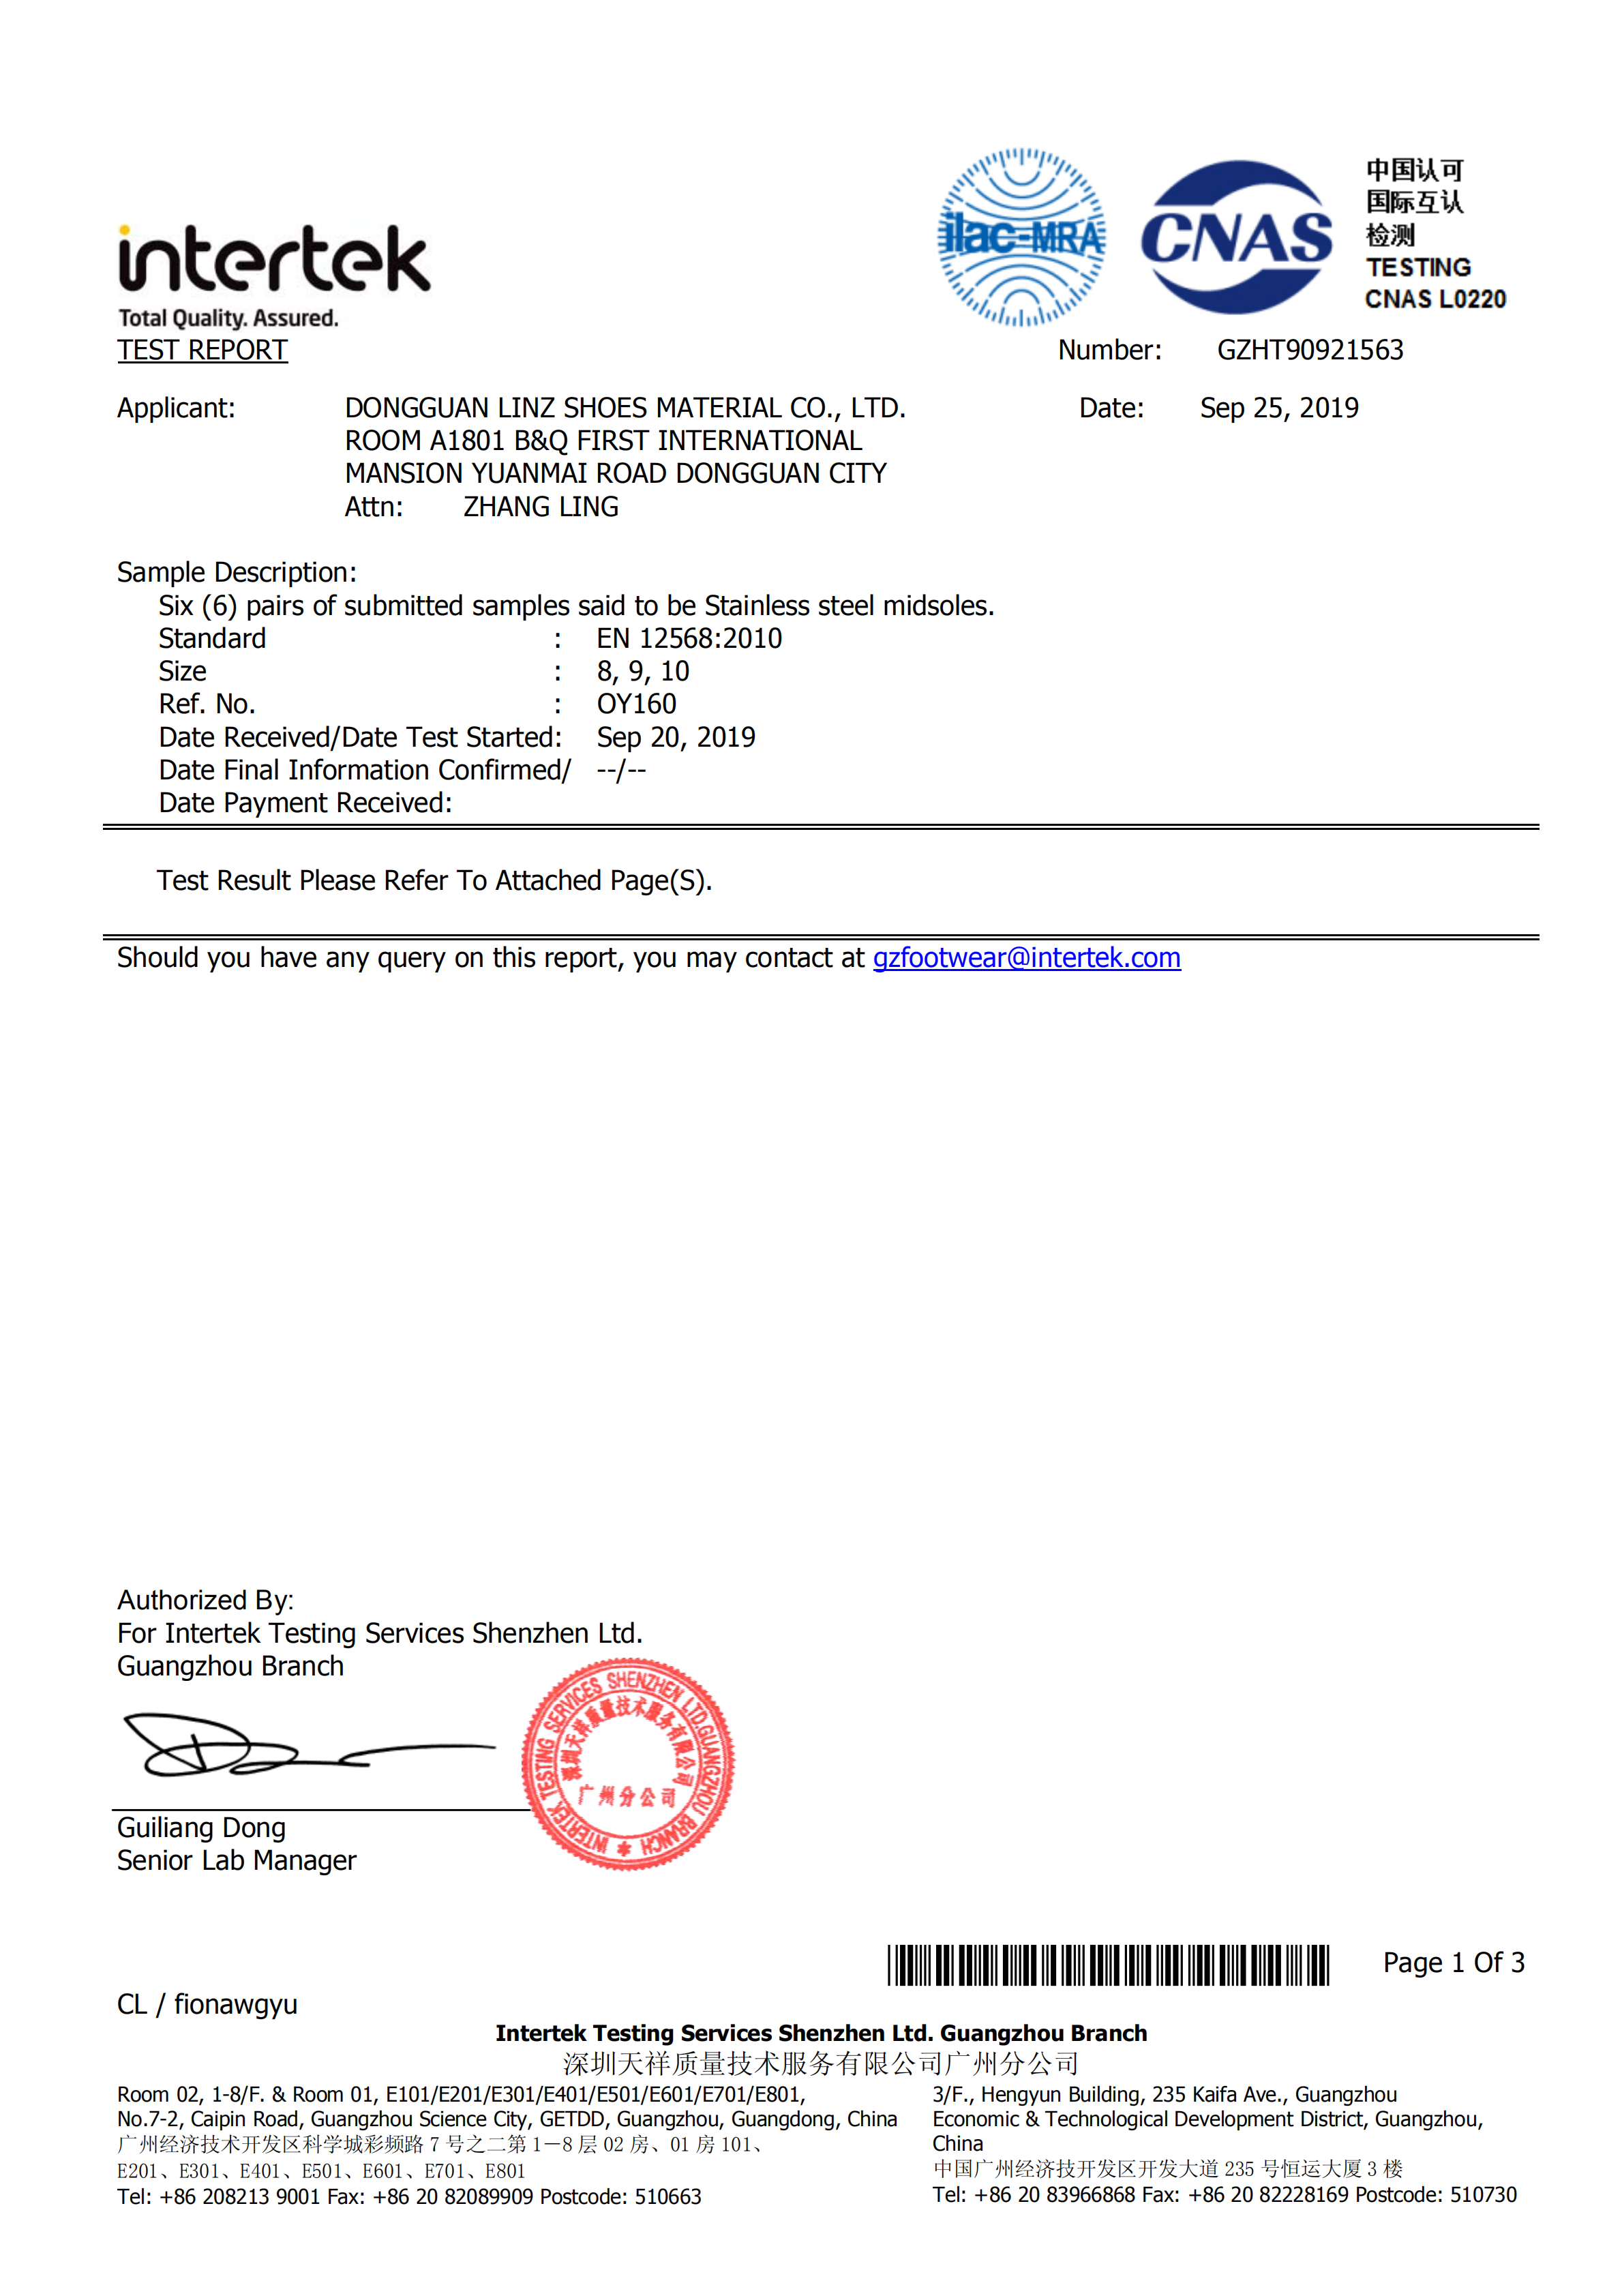 GZHT90921563 stainless steel OY160 test report